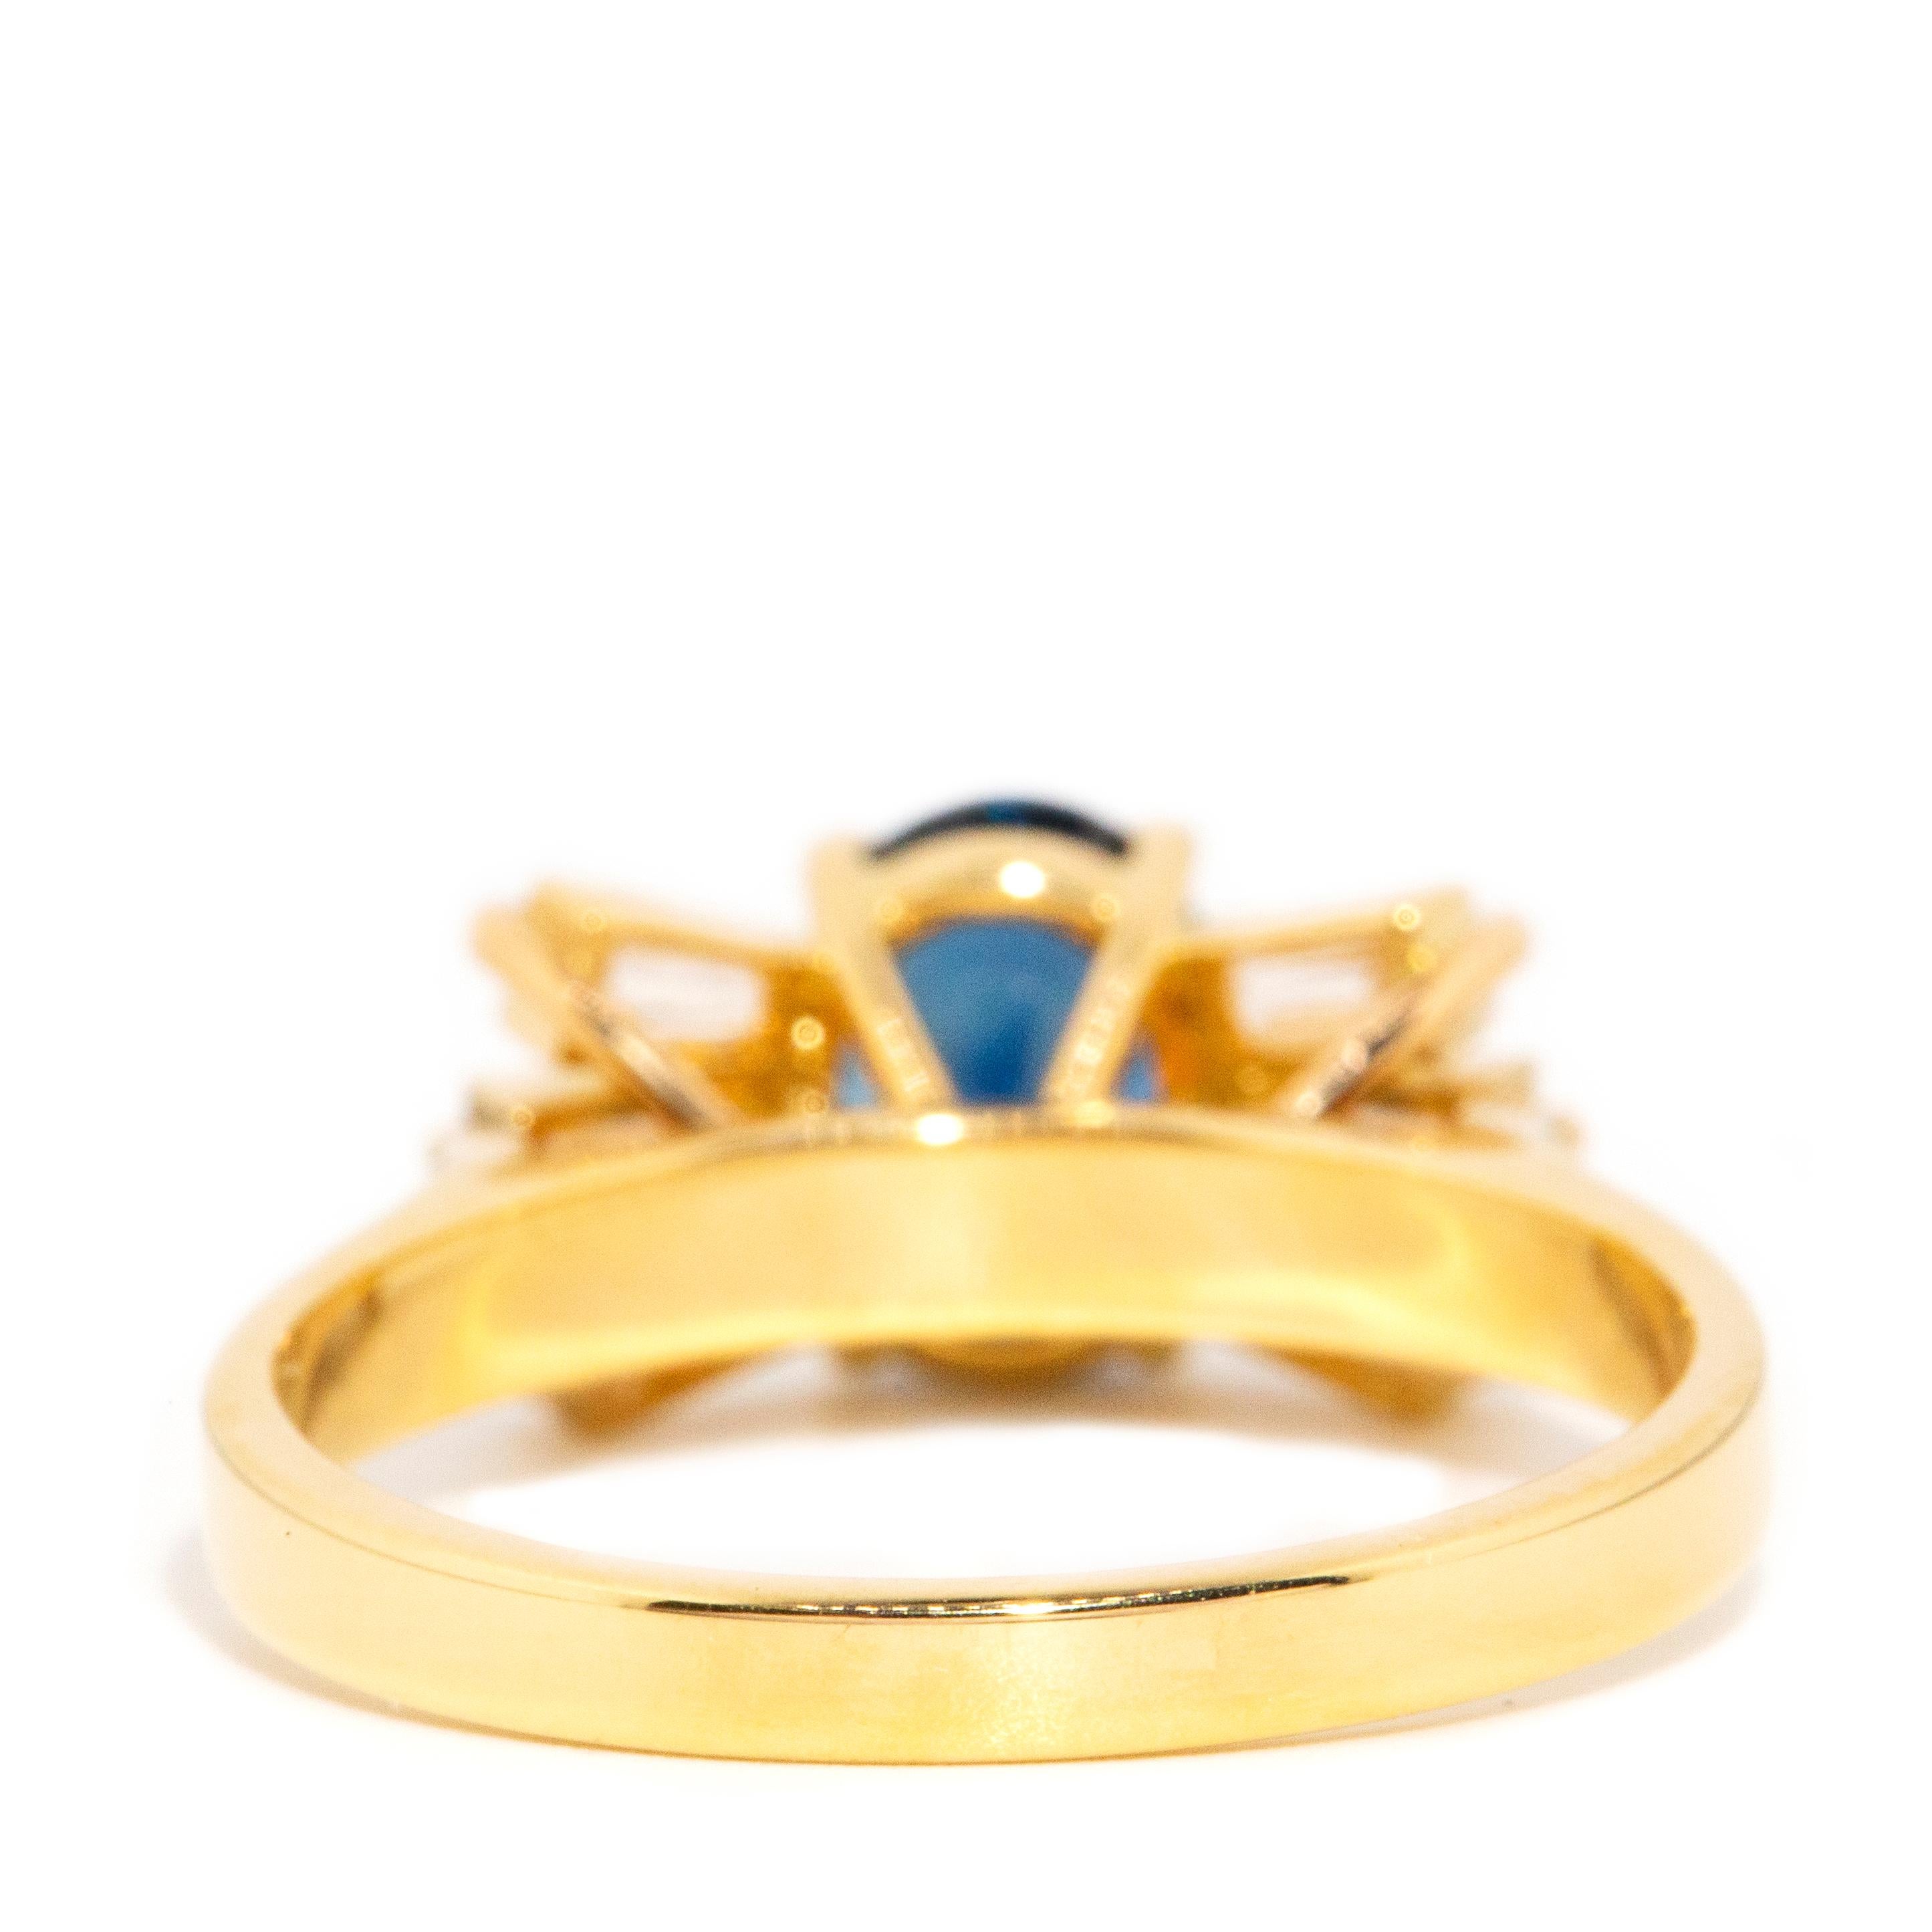 Vintage Circa 1980s 1.78 Carat Sapphire & Baguette Diamond Ring 18ct Yellow Gold For Sale 9